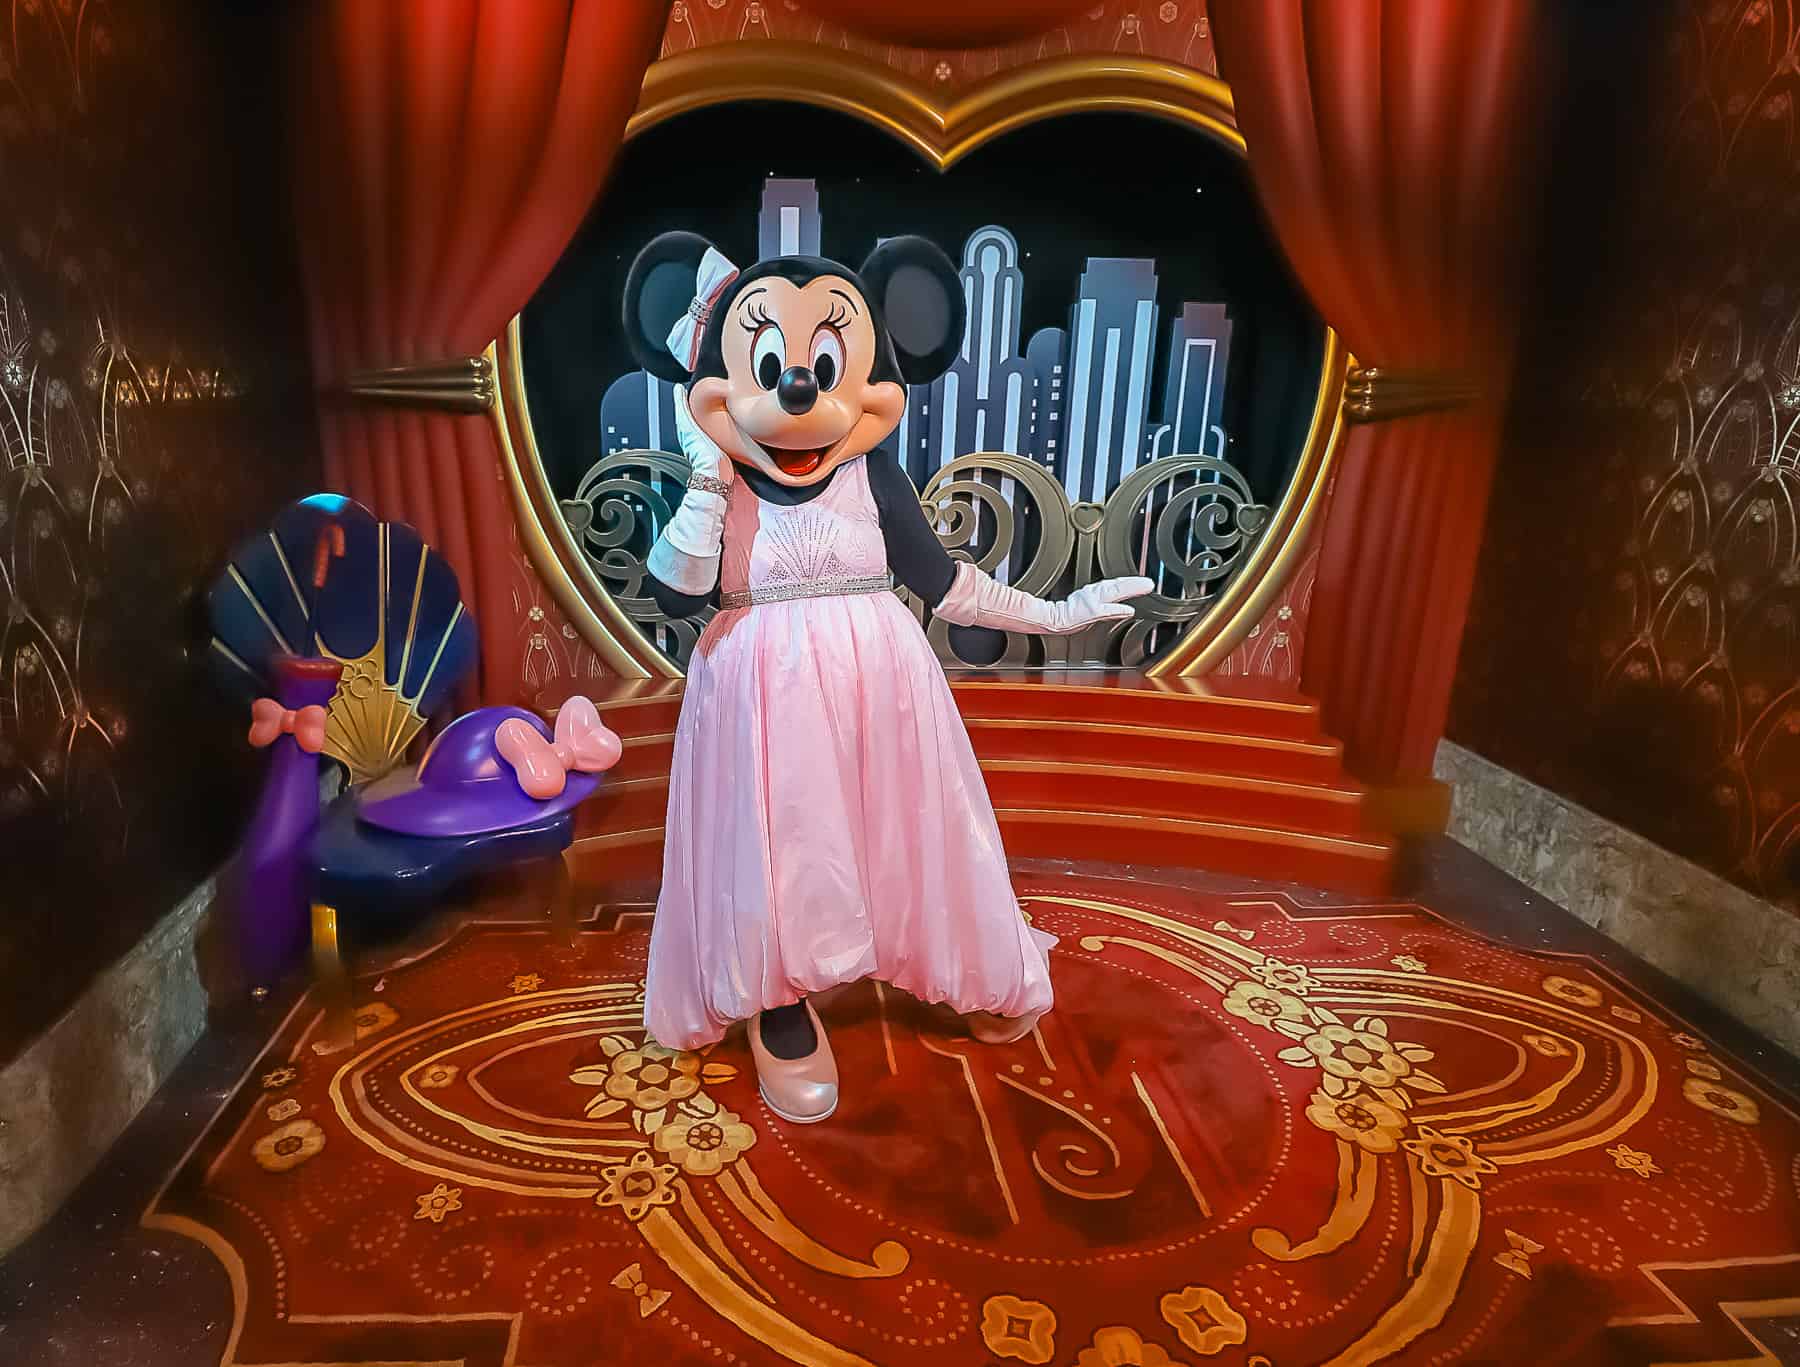 Minnie Mouse in her pink ballgown on the red carpet. 